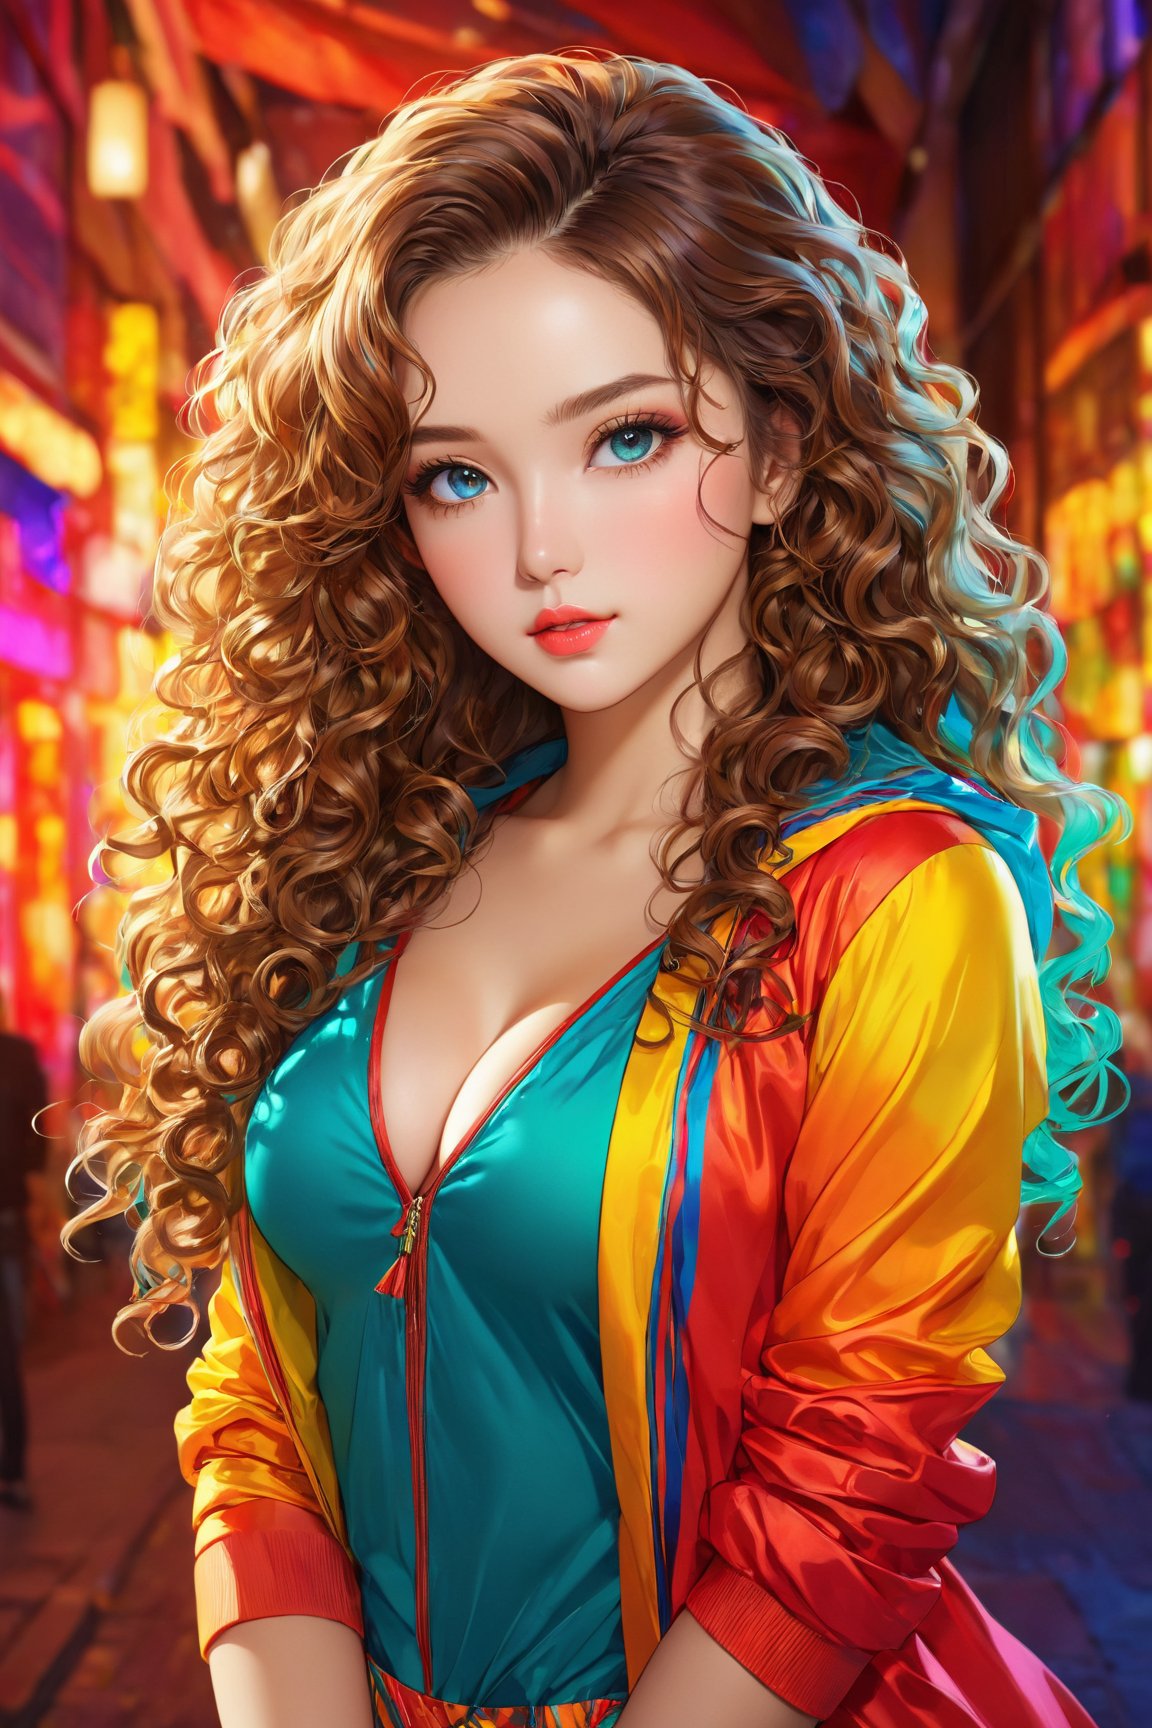 (bestselling anime girl,ultra-realistic:1.2),sexy detailed eyes,beautiful detailed lips,curly long hair,flawless smooth skin,vibrant colorful clothing,powerful confident pose,intense gaze,soft lighting,anime style,portraits,rich vibrant colors,luminous background